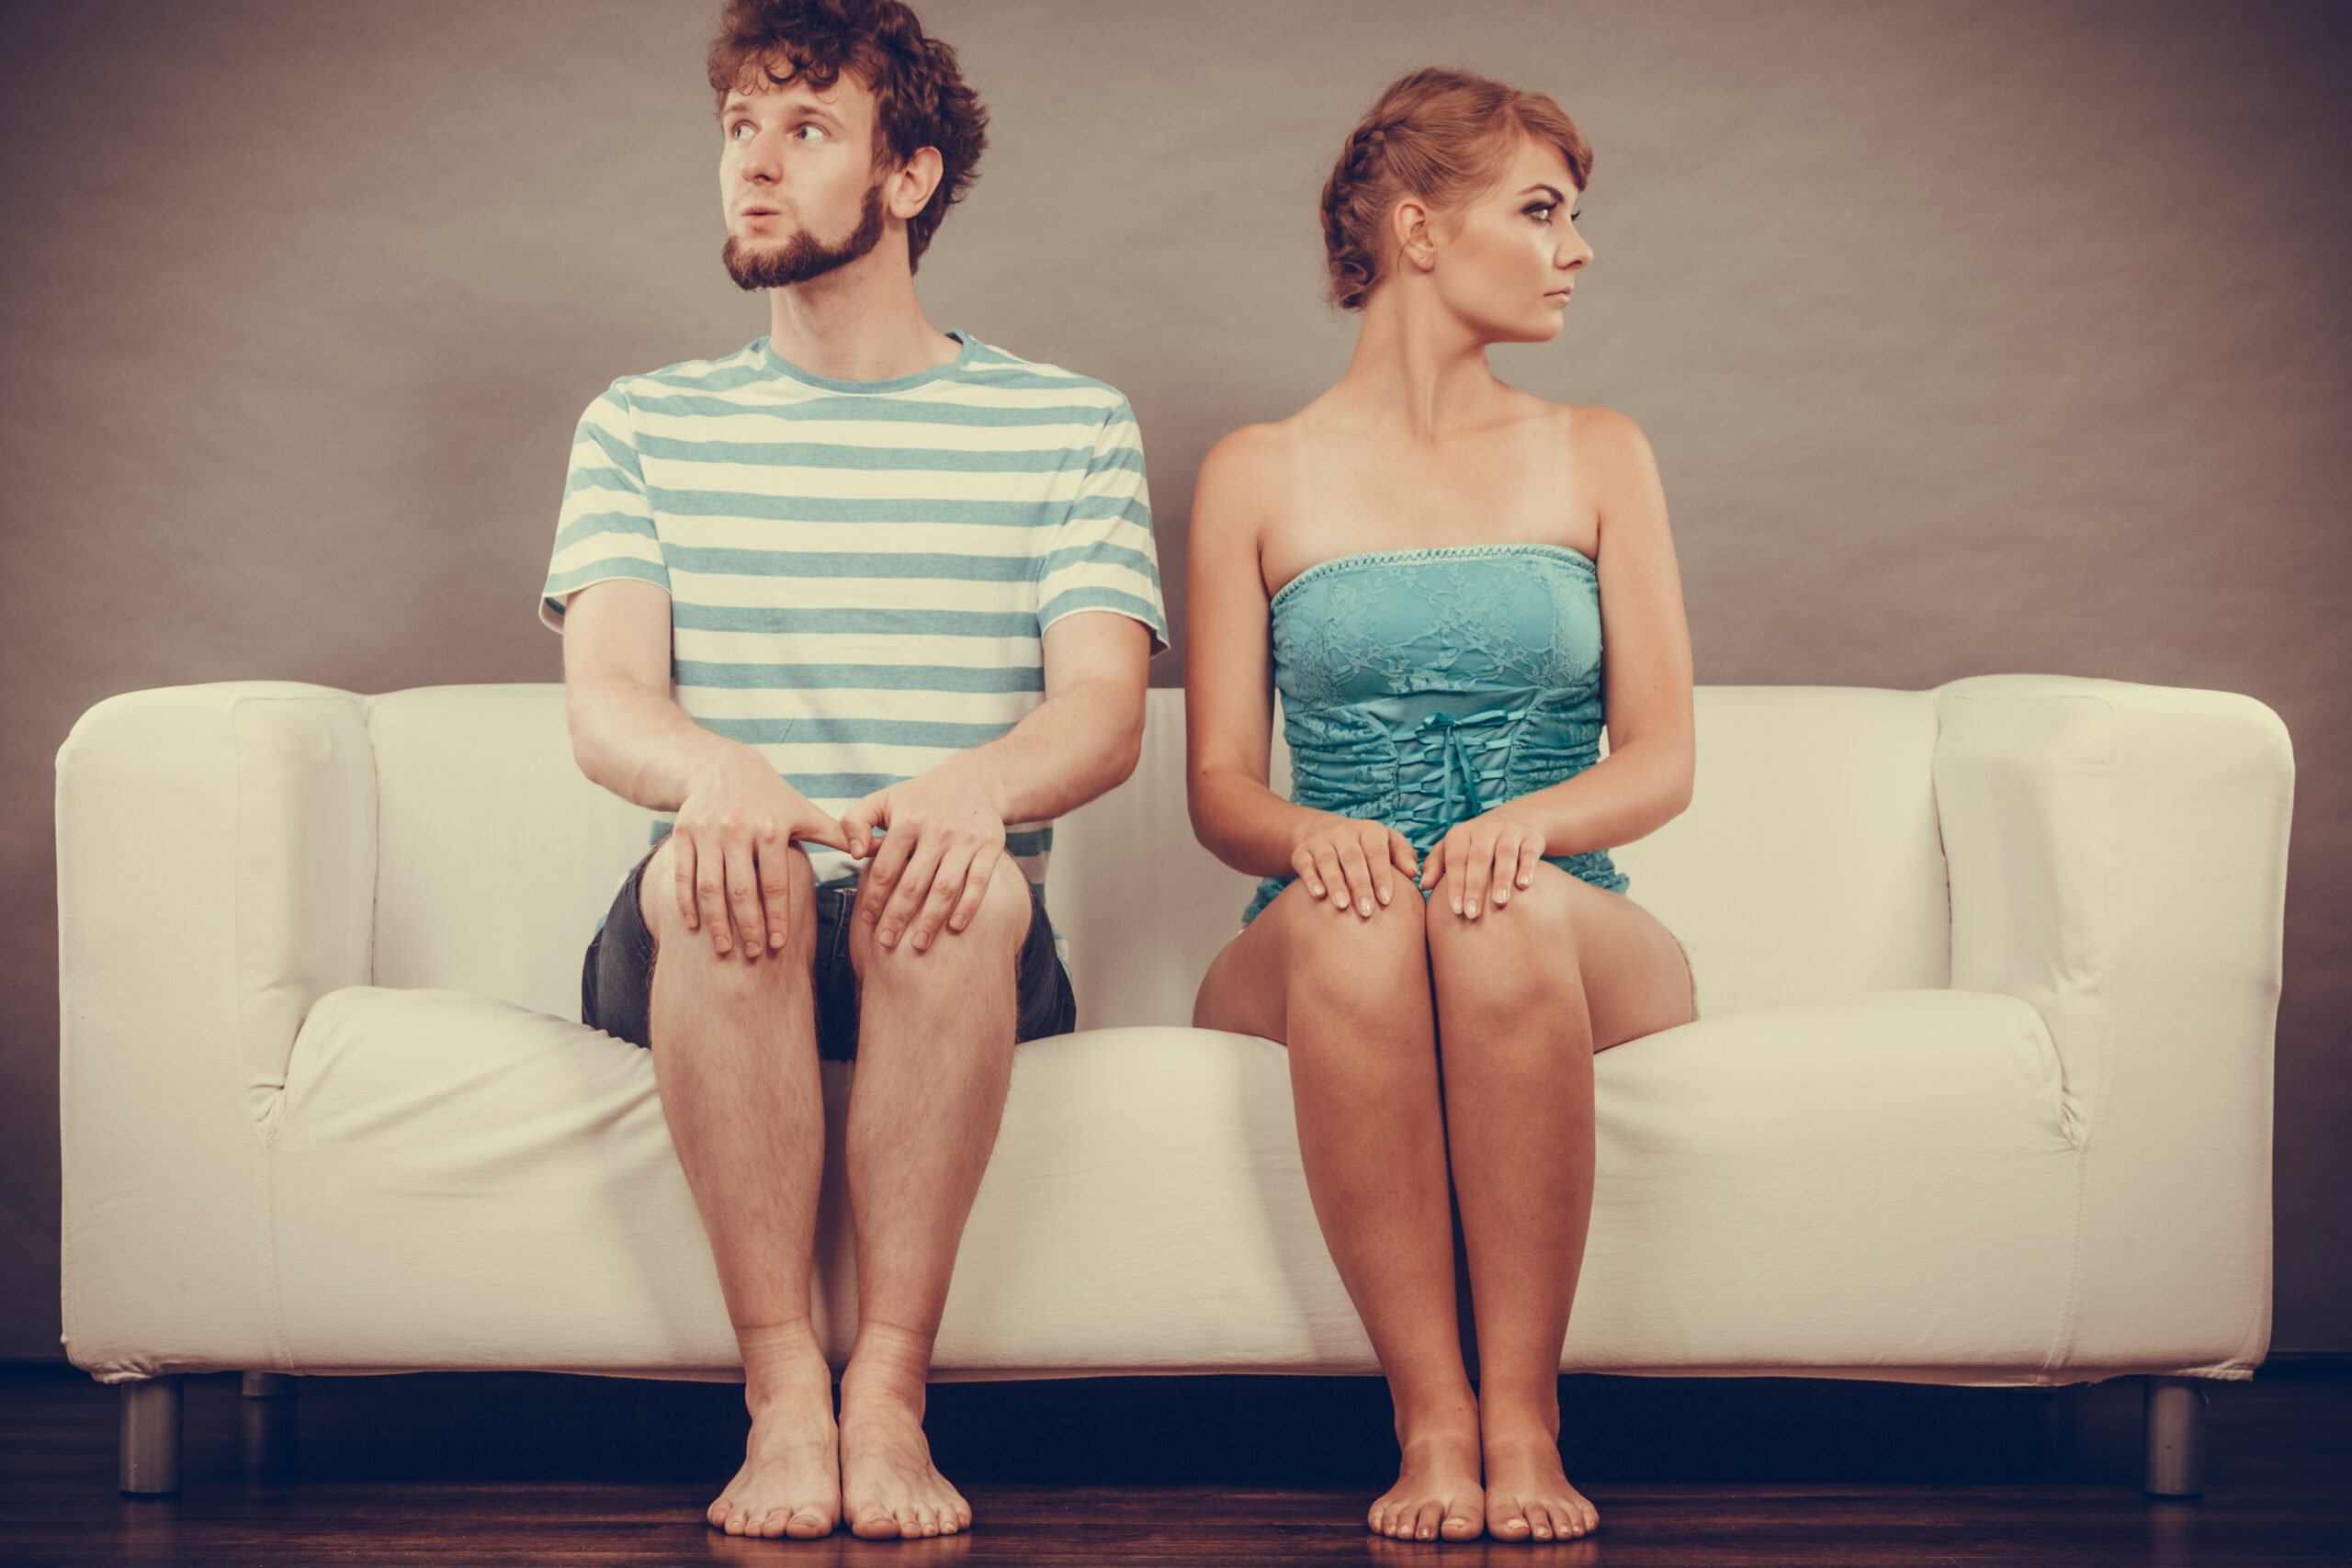 Healthy Communication & Space In Your Relationship | Couples Counseling Las Vegas